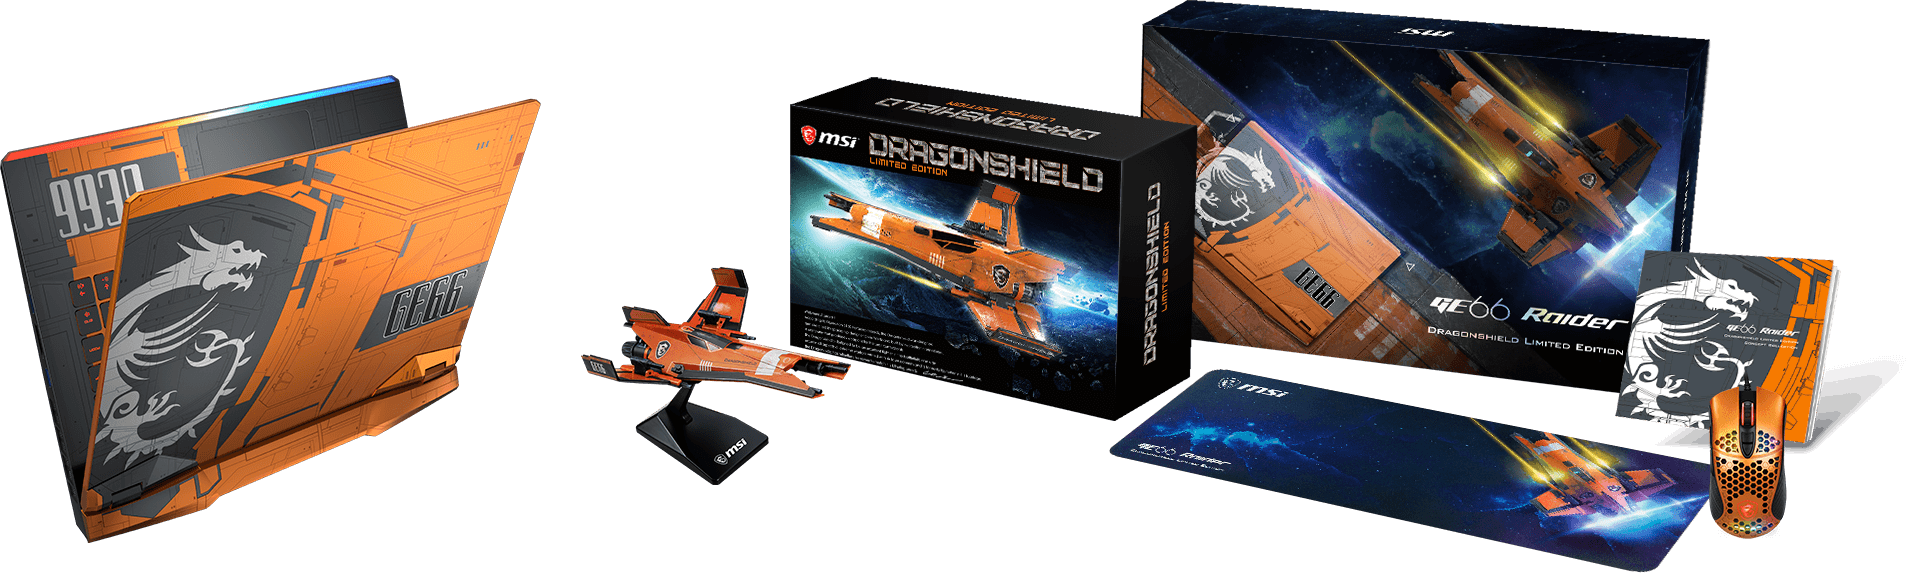 Bundle img REVIEW: MSI’s Dragonshield Is A Space Age Gaming Machine, Inside And Out